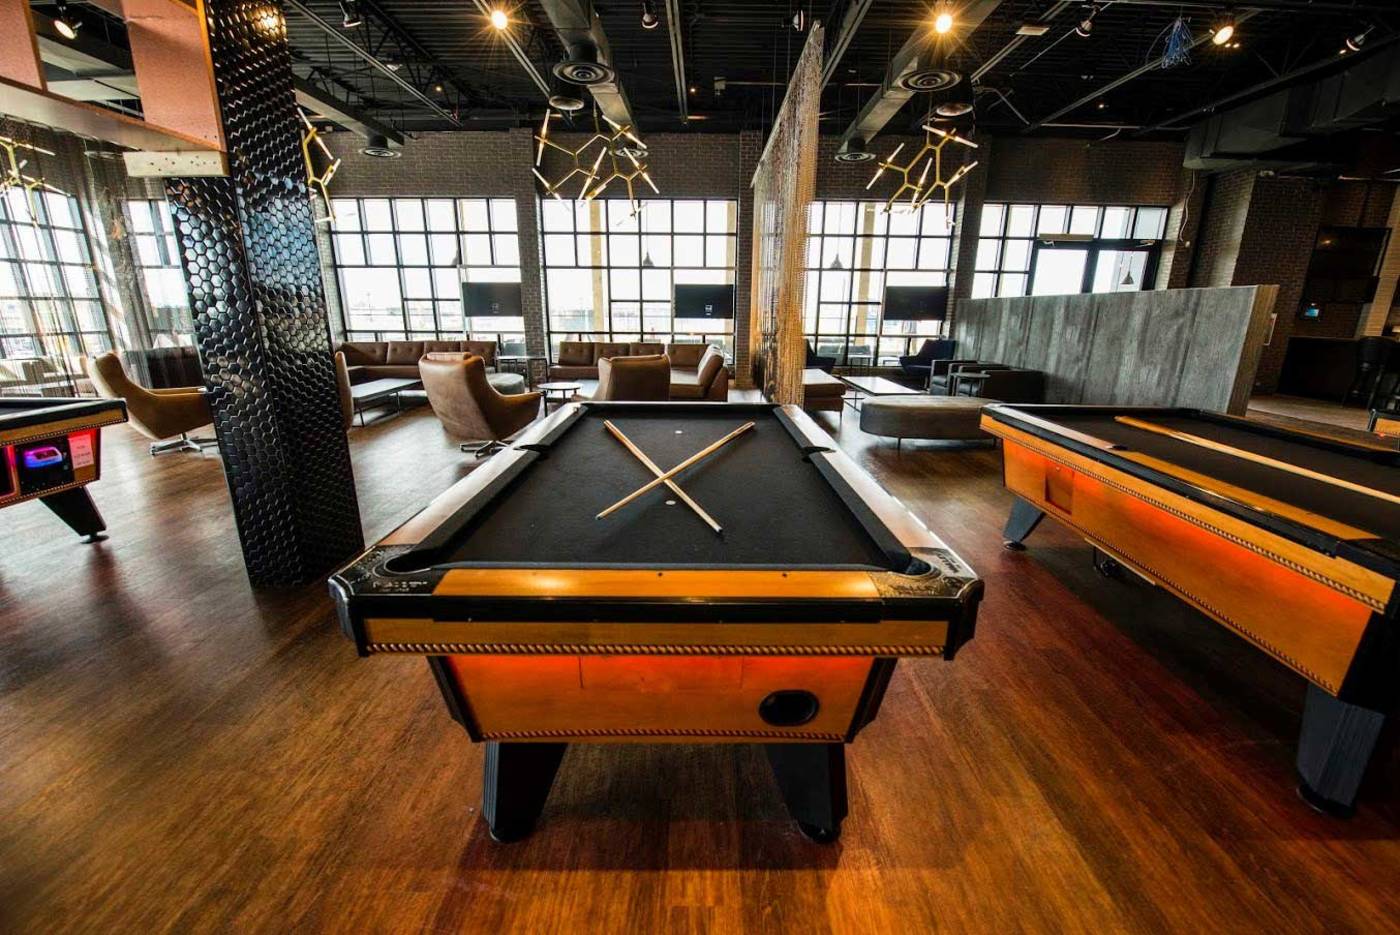 pool tables and chairs in arcade with no patrons